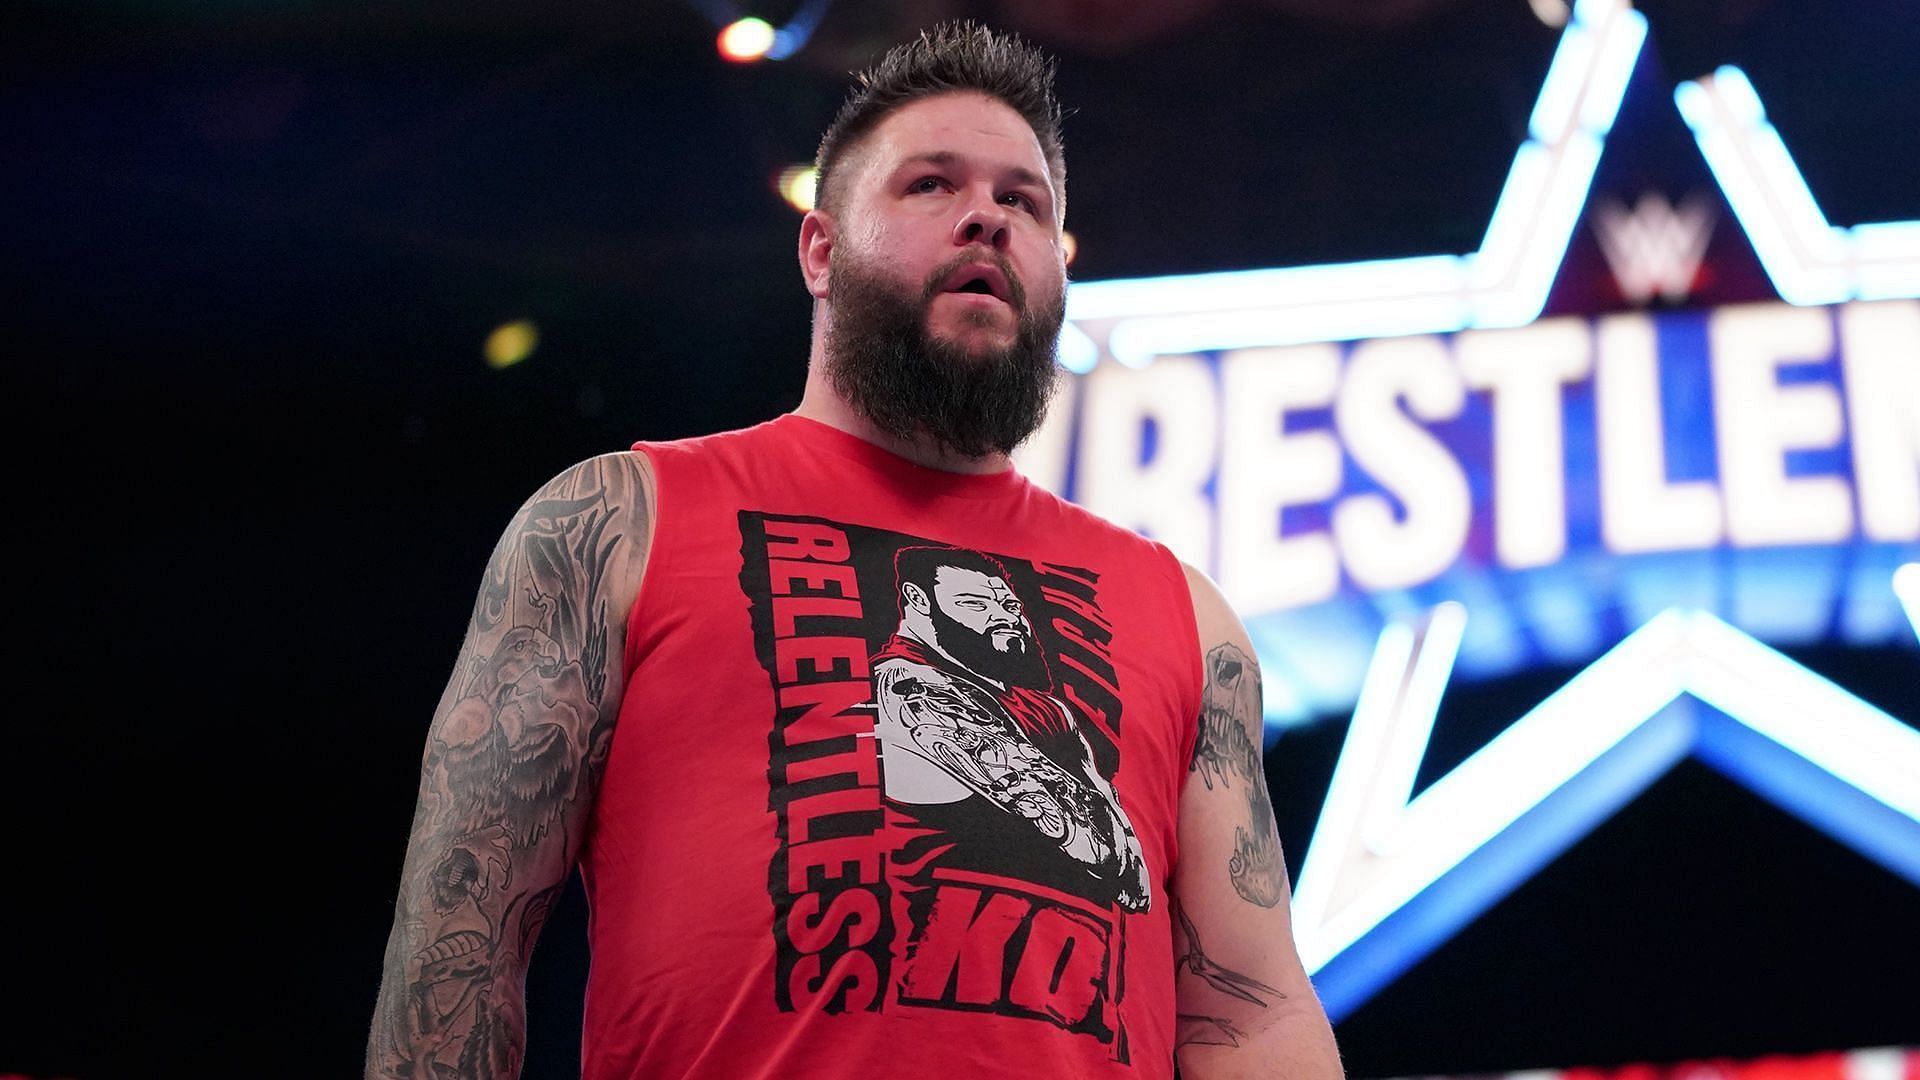 Kevin Owens faced Stone Cold Steve Austin in is returning match at WrestleMania 38